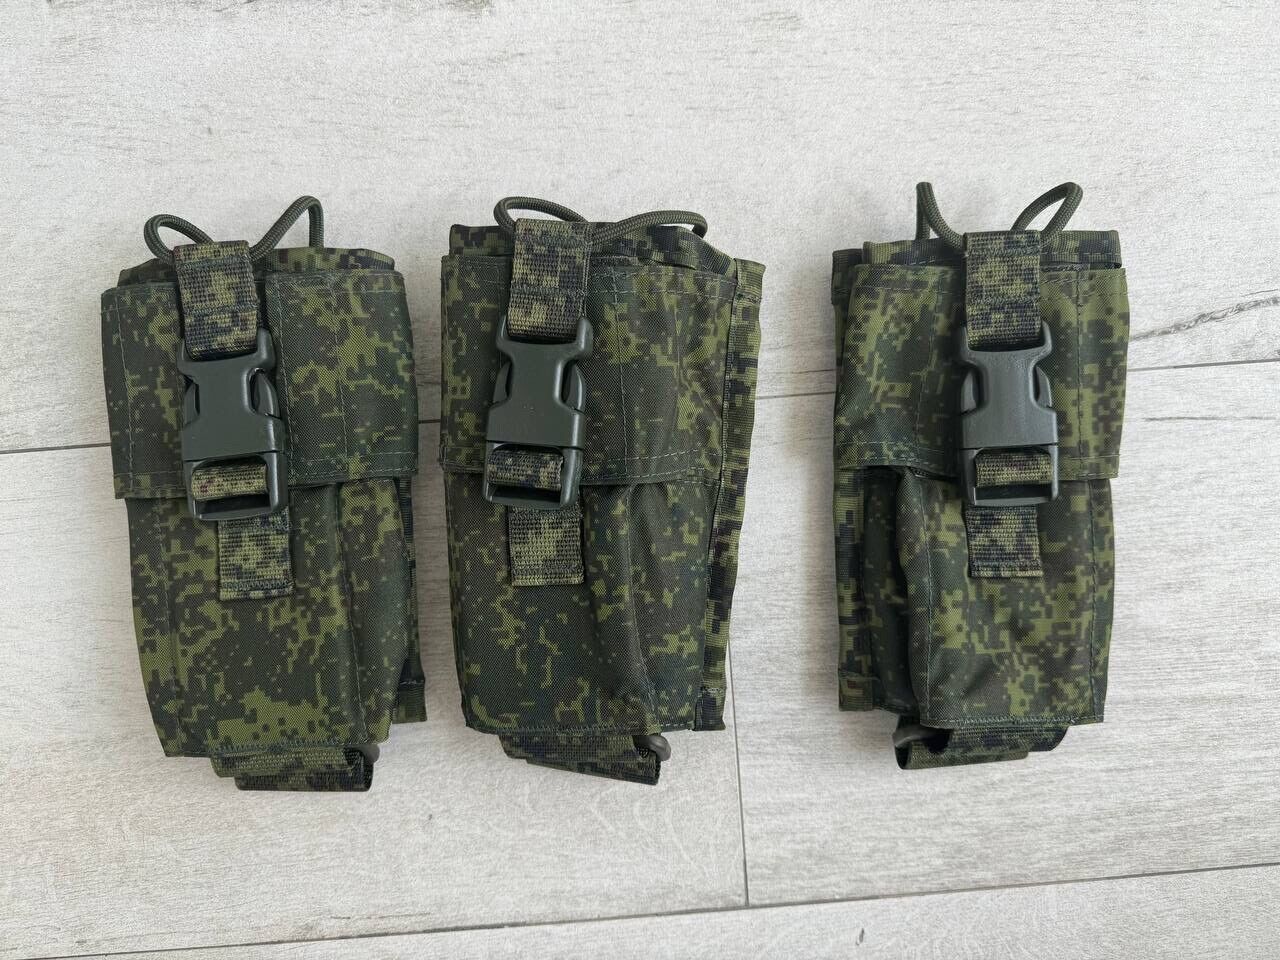 Russian Army Radio Pouch Ratnik Price For Each.